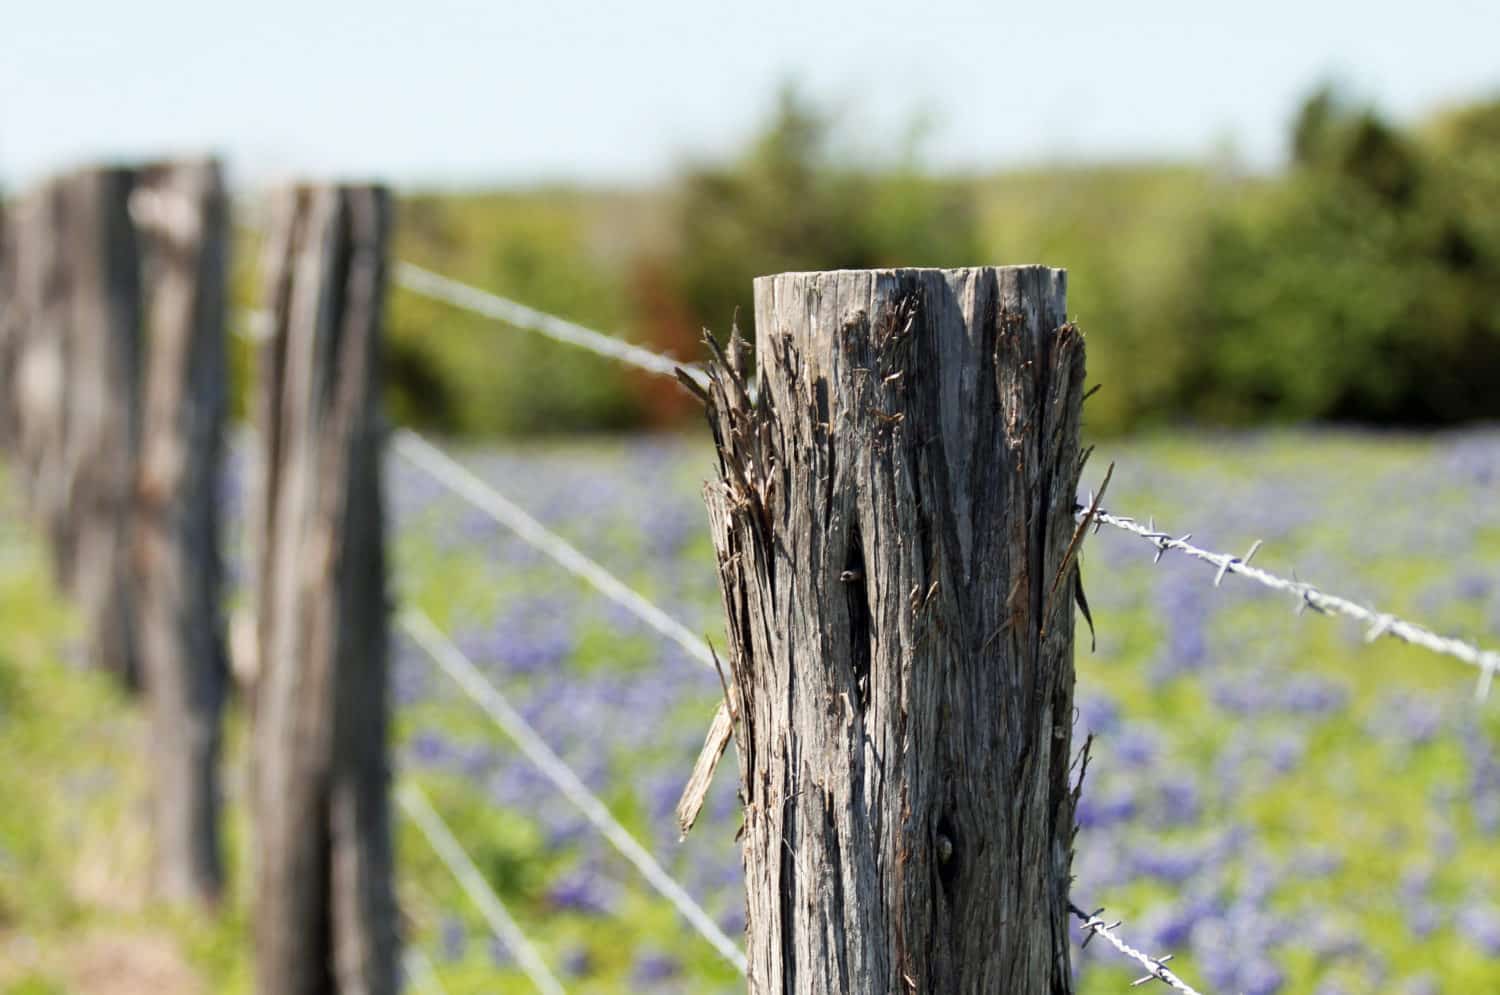 A fence and bluebonnets in The Texas Hill Country region.